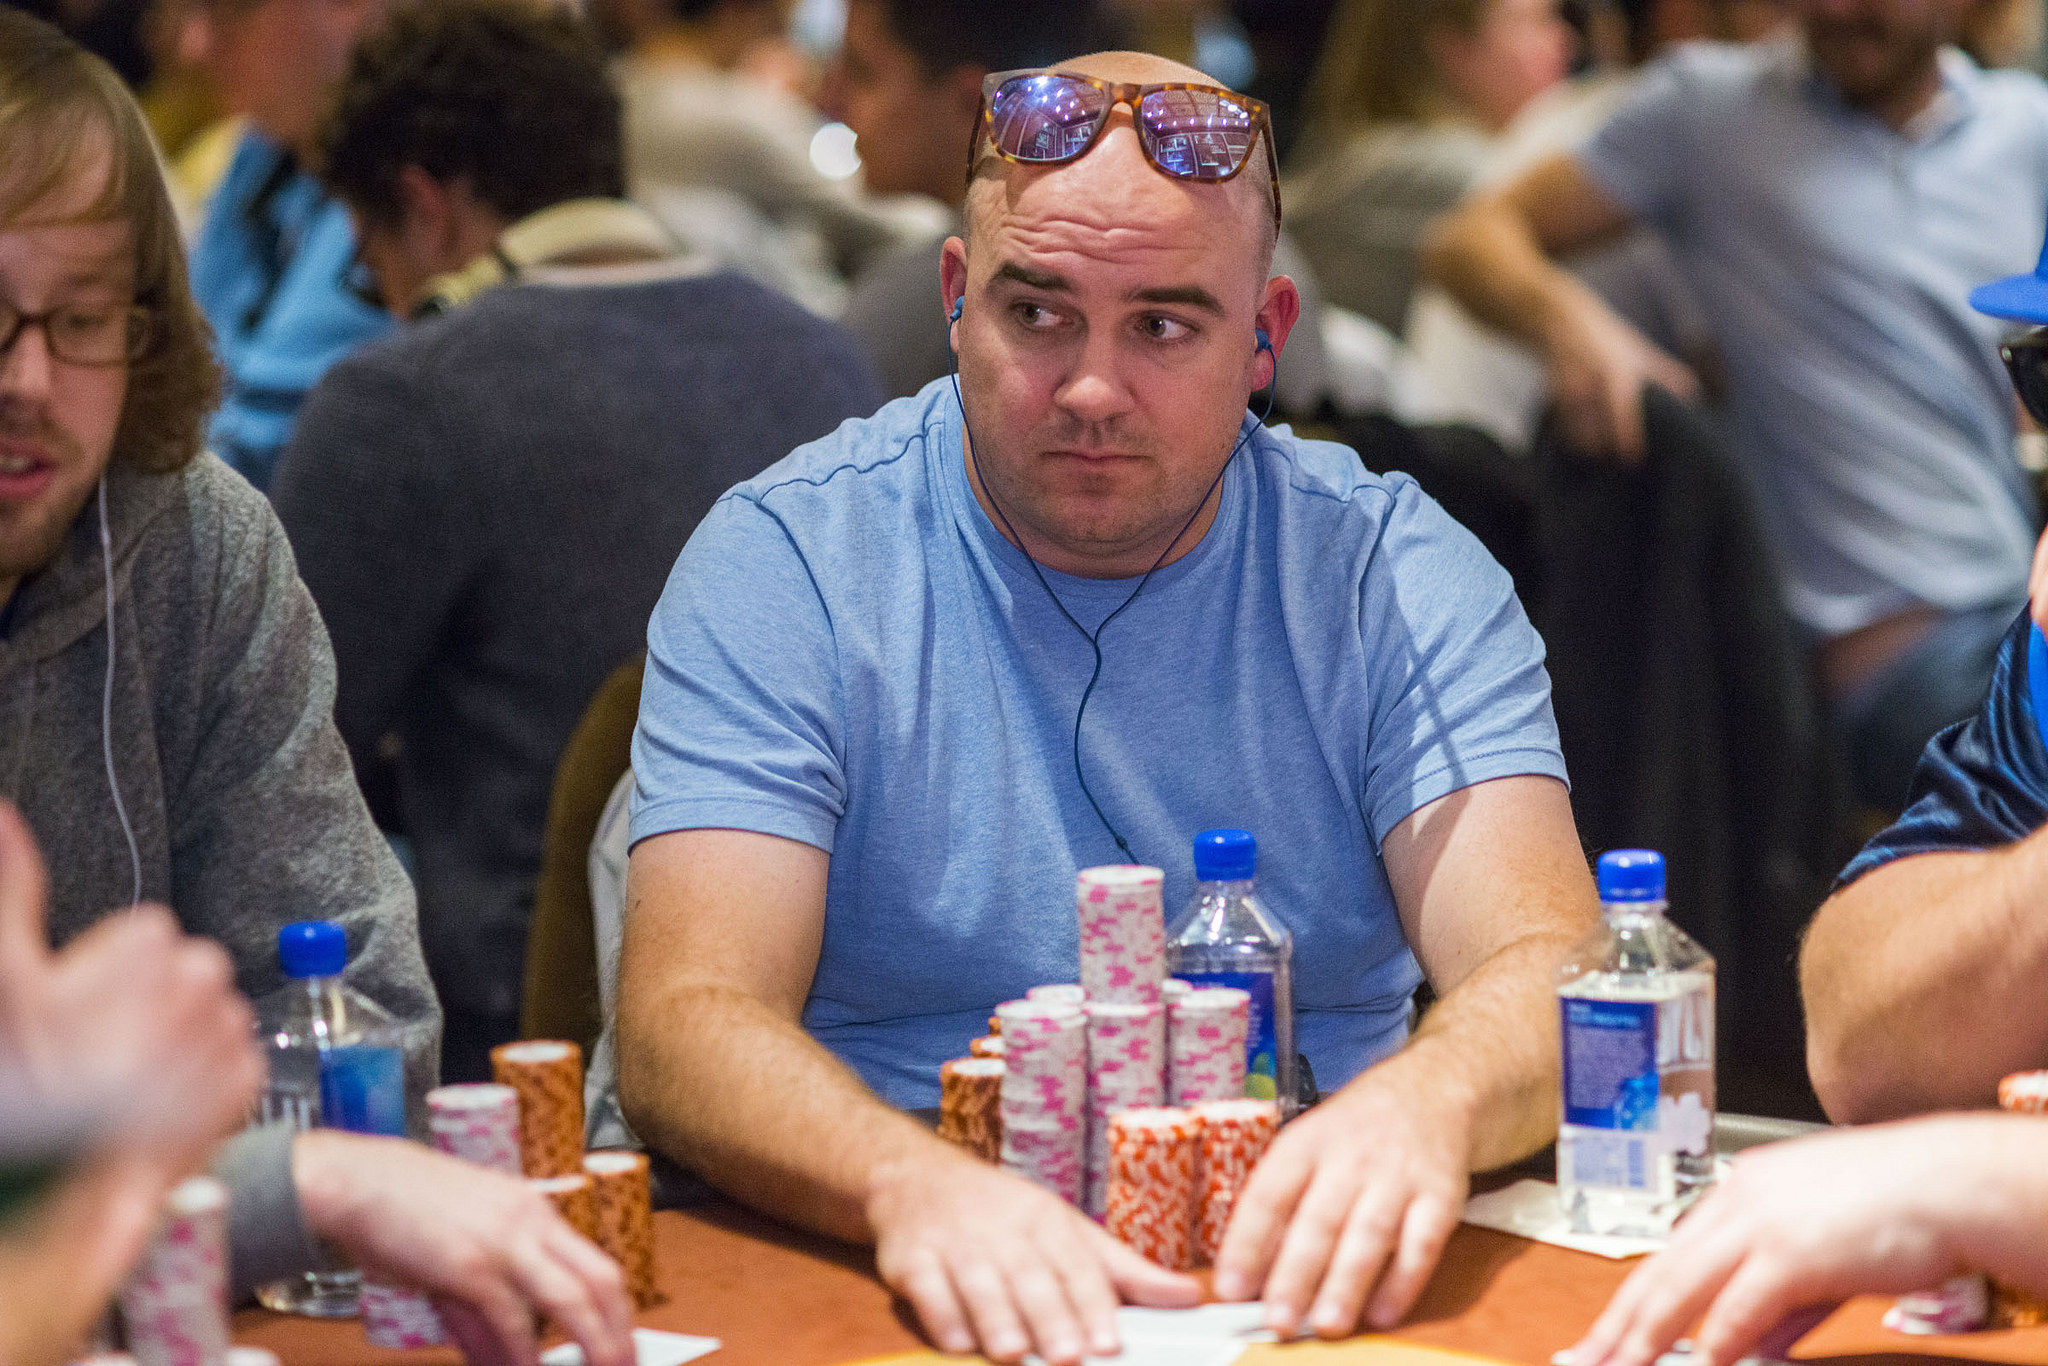 WSOP Europe: Ryan Hughes Overtakes Chris Ferguson in POY Race after First Event